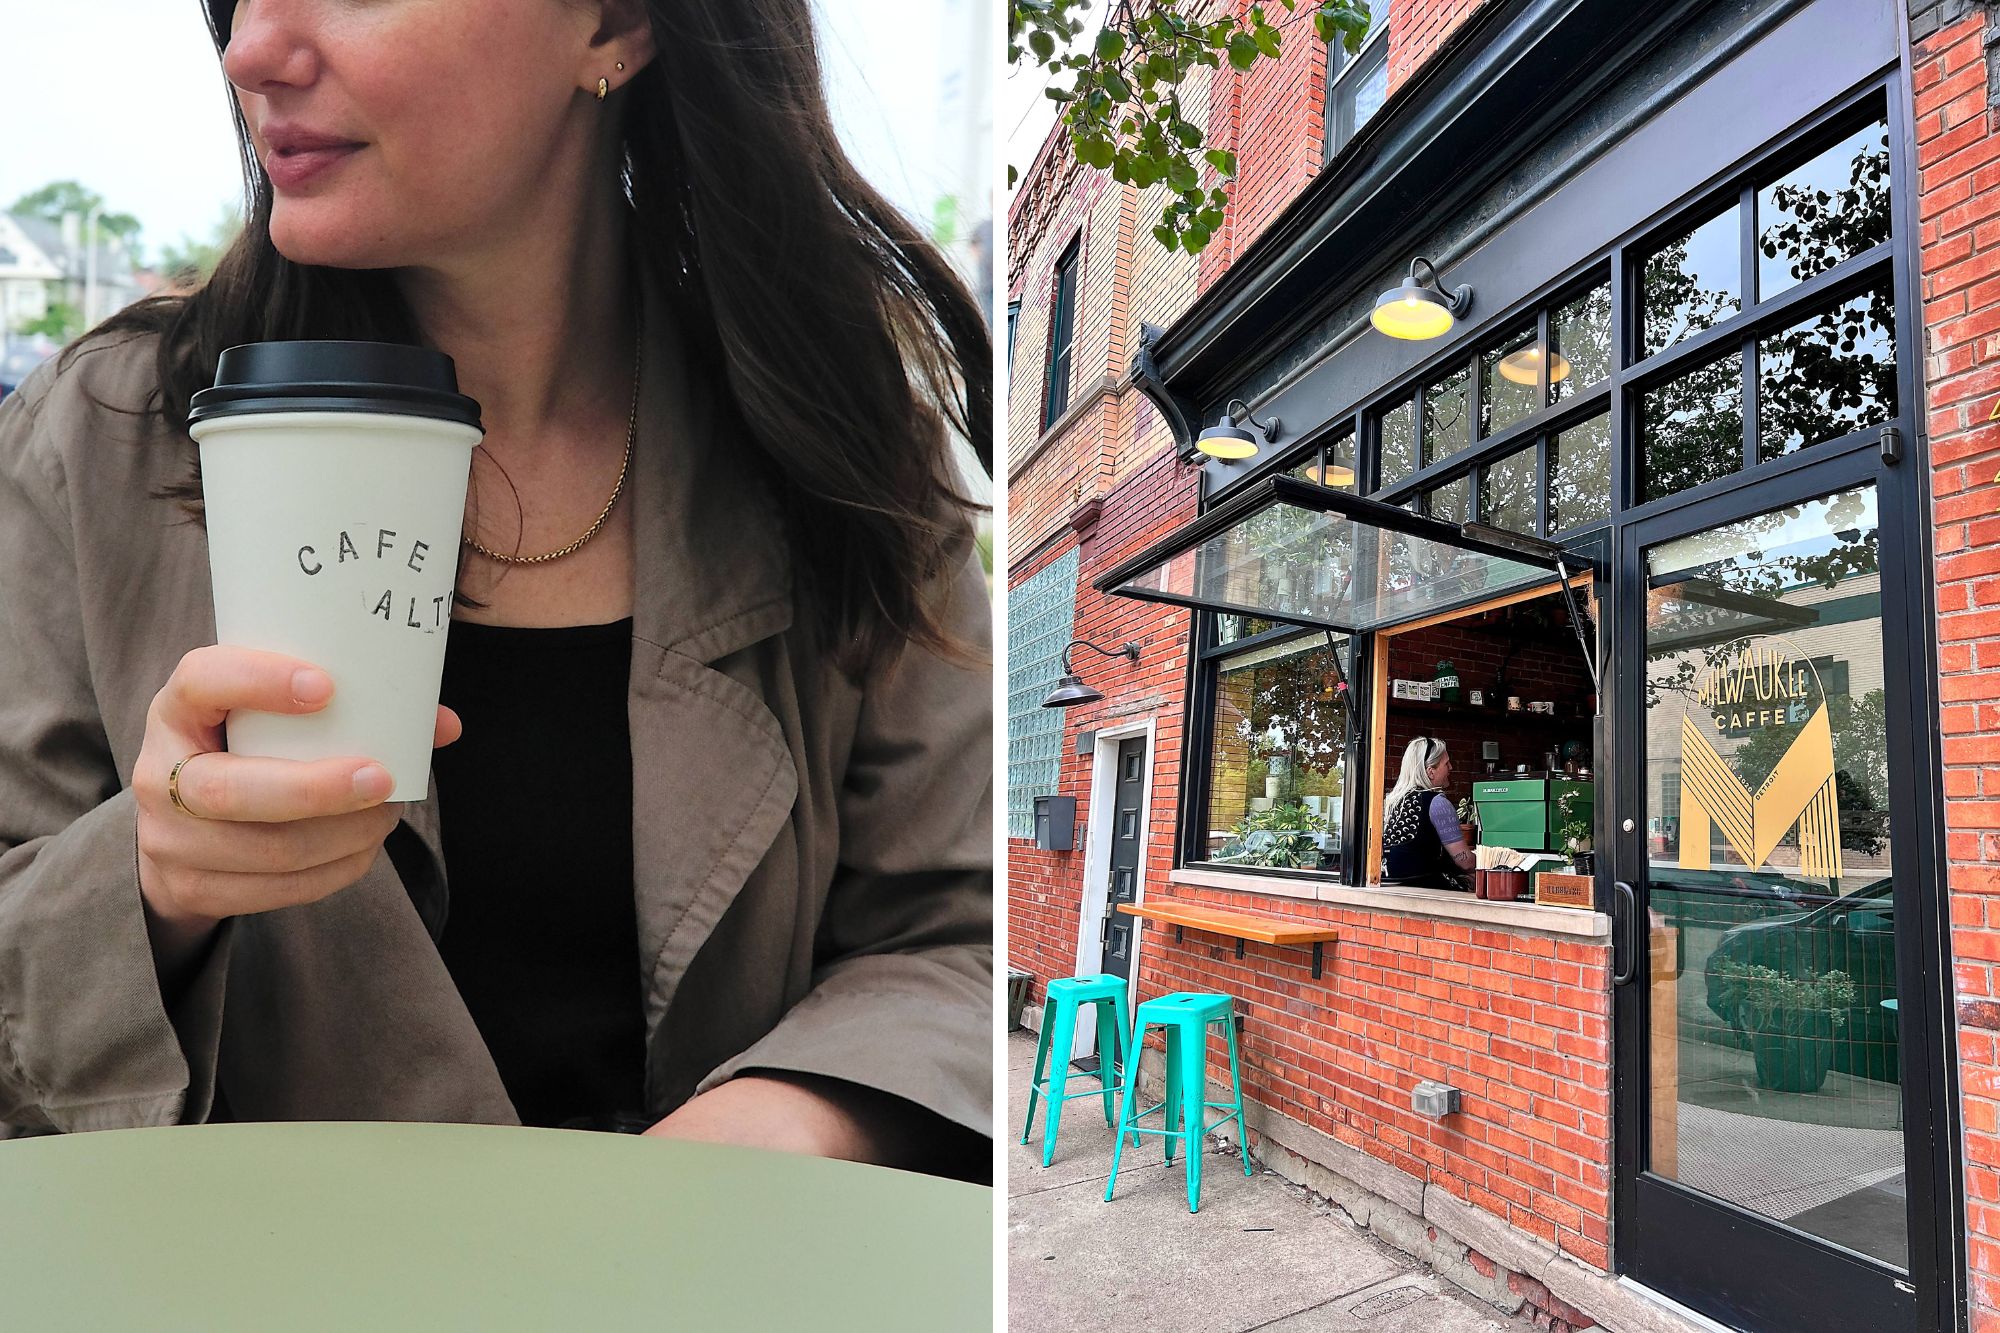 Two images: one of Alyssa sitting and holding a Cafe Alto cup and another of the exterior of Milwaukee Caffe